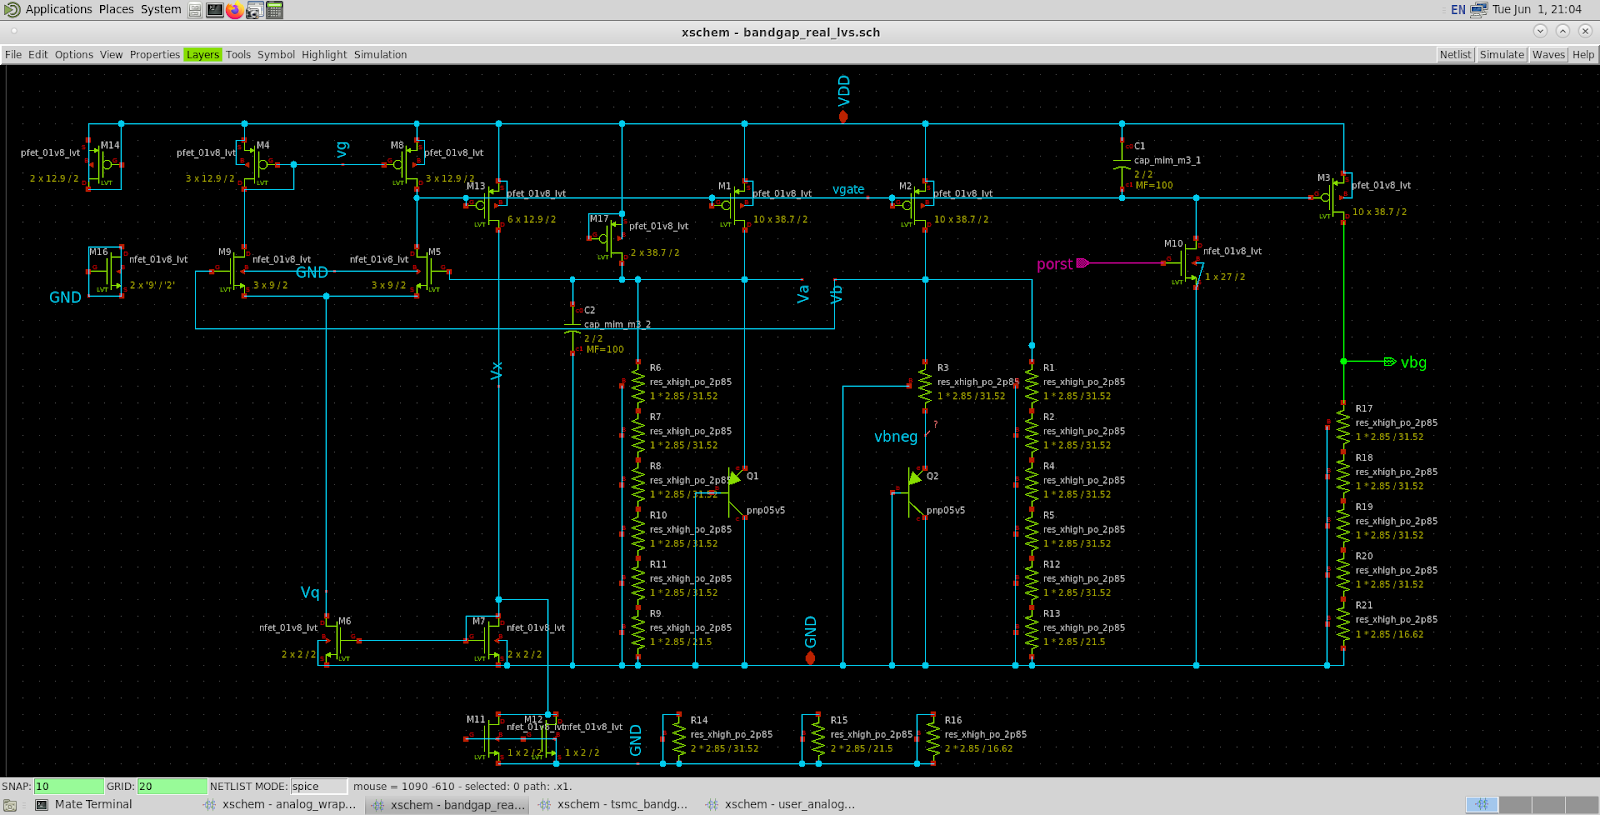 a screenshot of the circuit in this repository